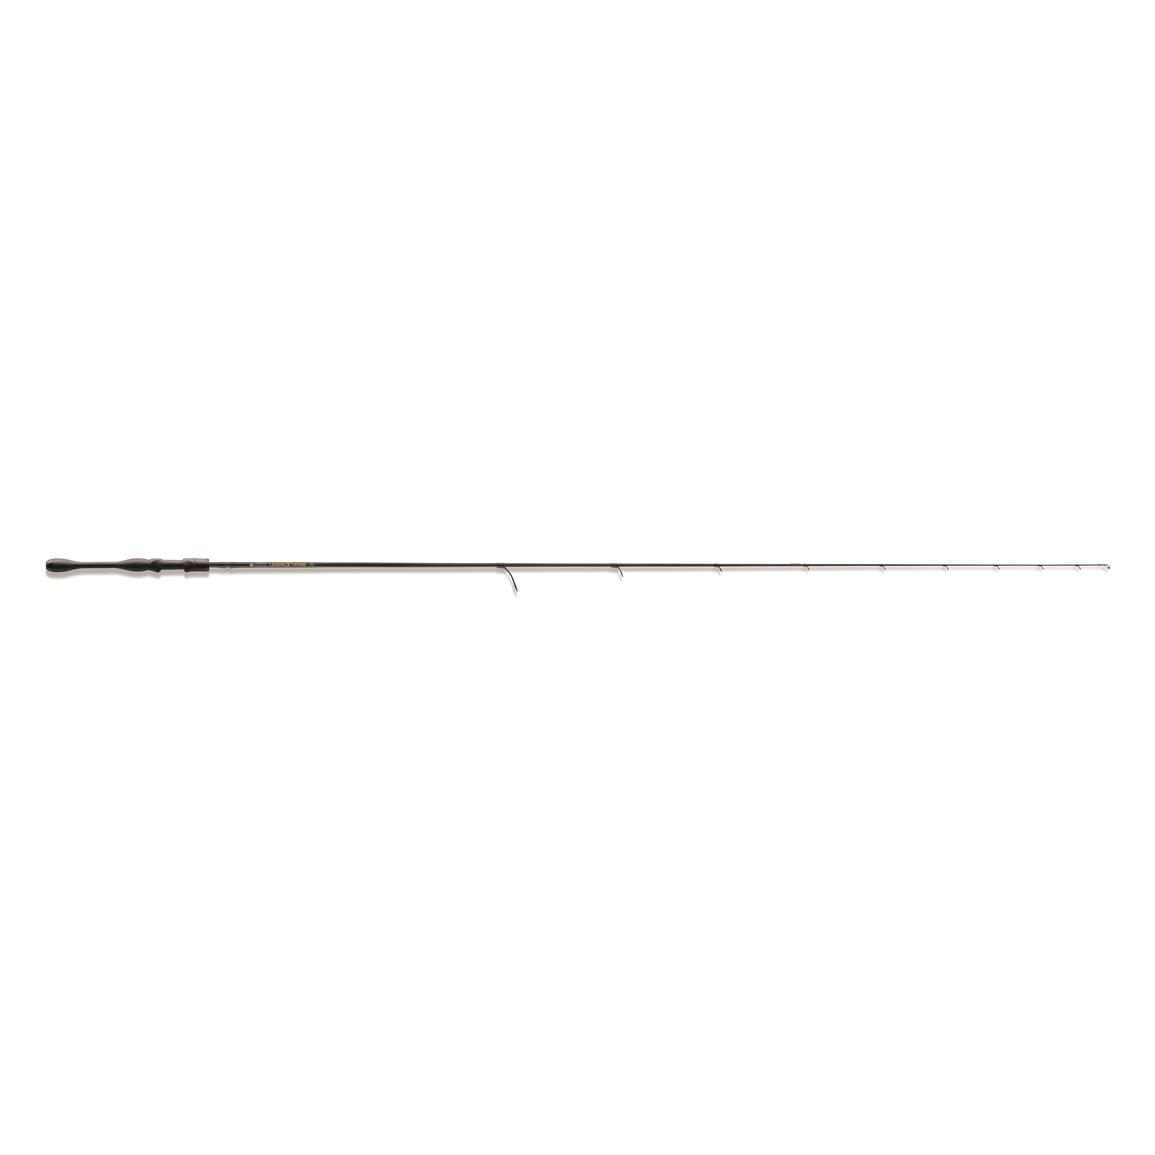 St. Croix Rods Legend Xtreme Spinning Rod, 6'8" Length, Medium Power, Xtra Fast Action